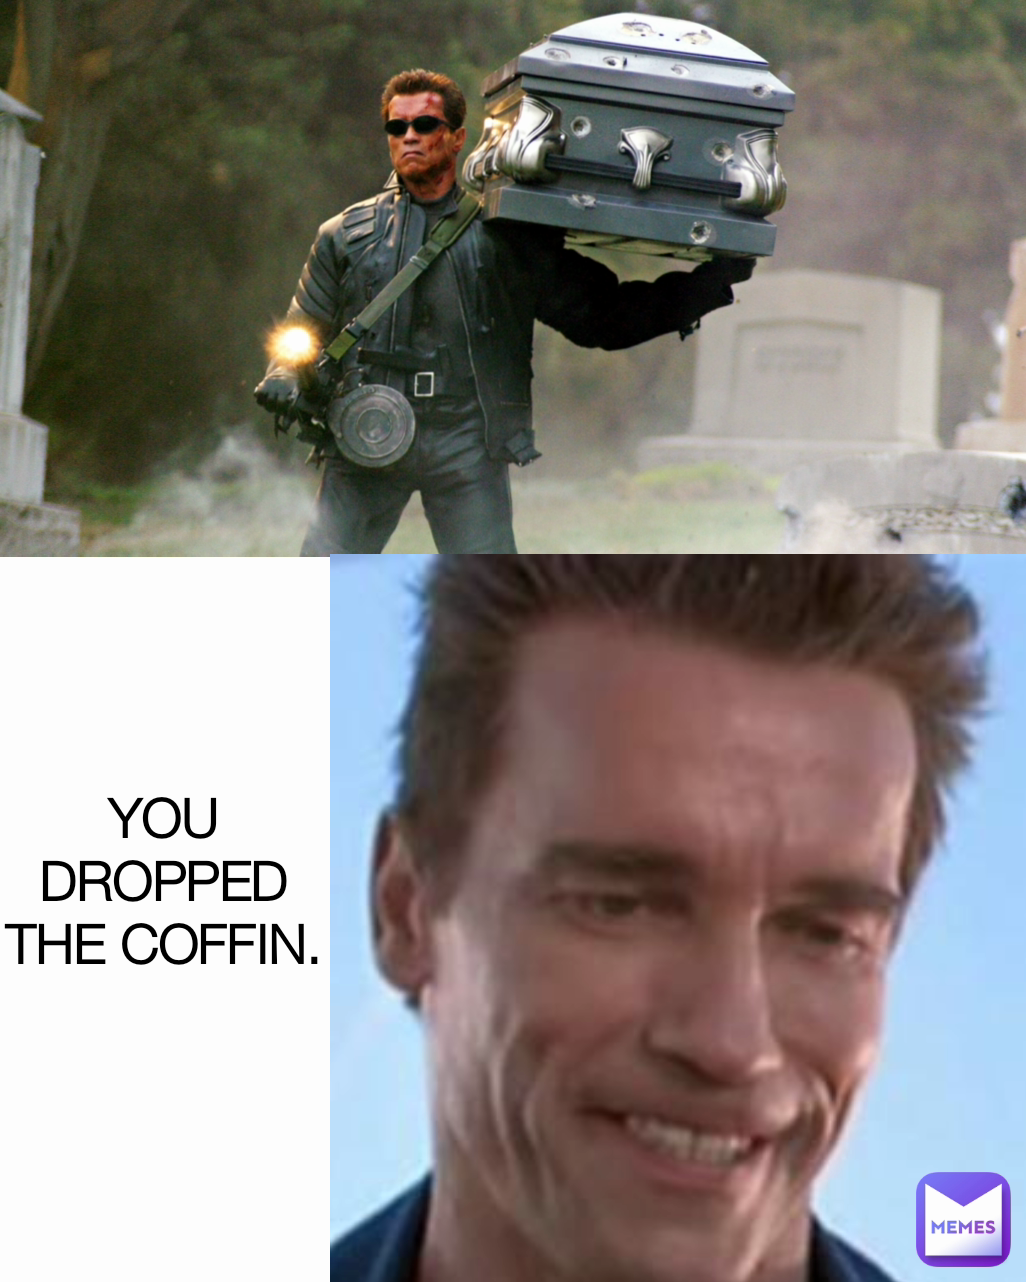 YOU DROPPED THE COFFIN.